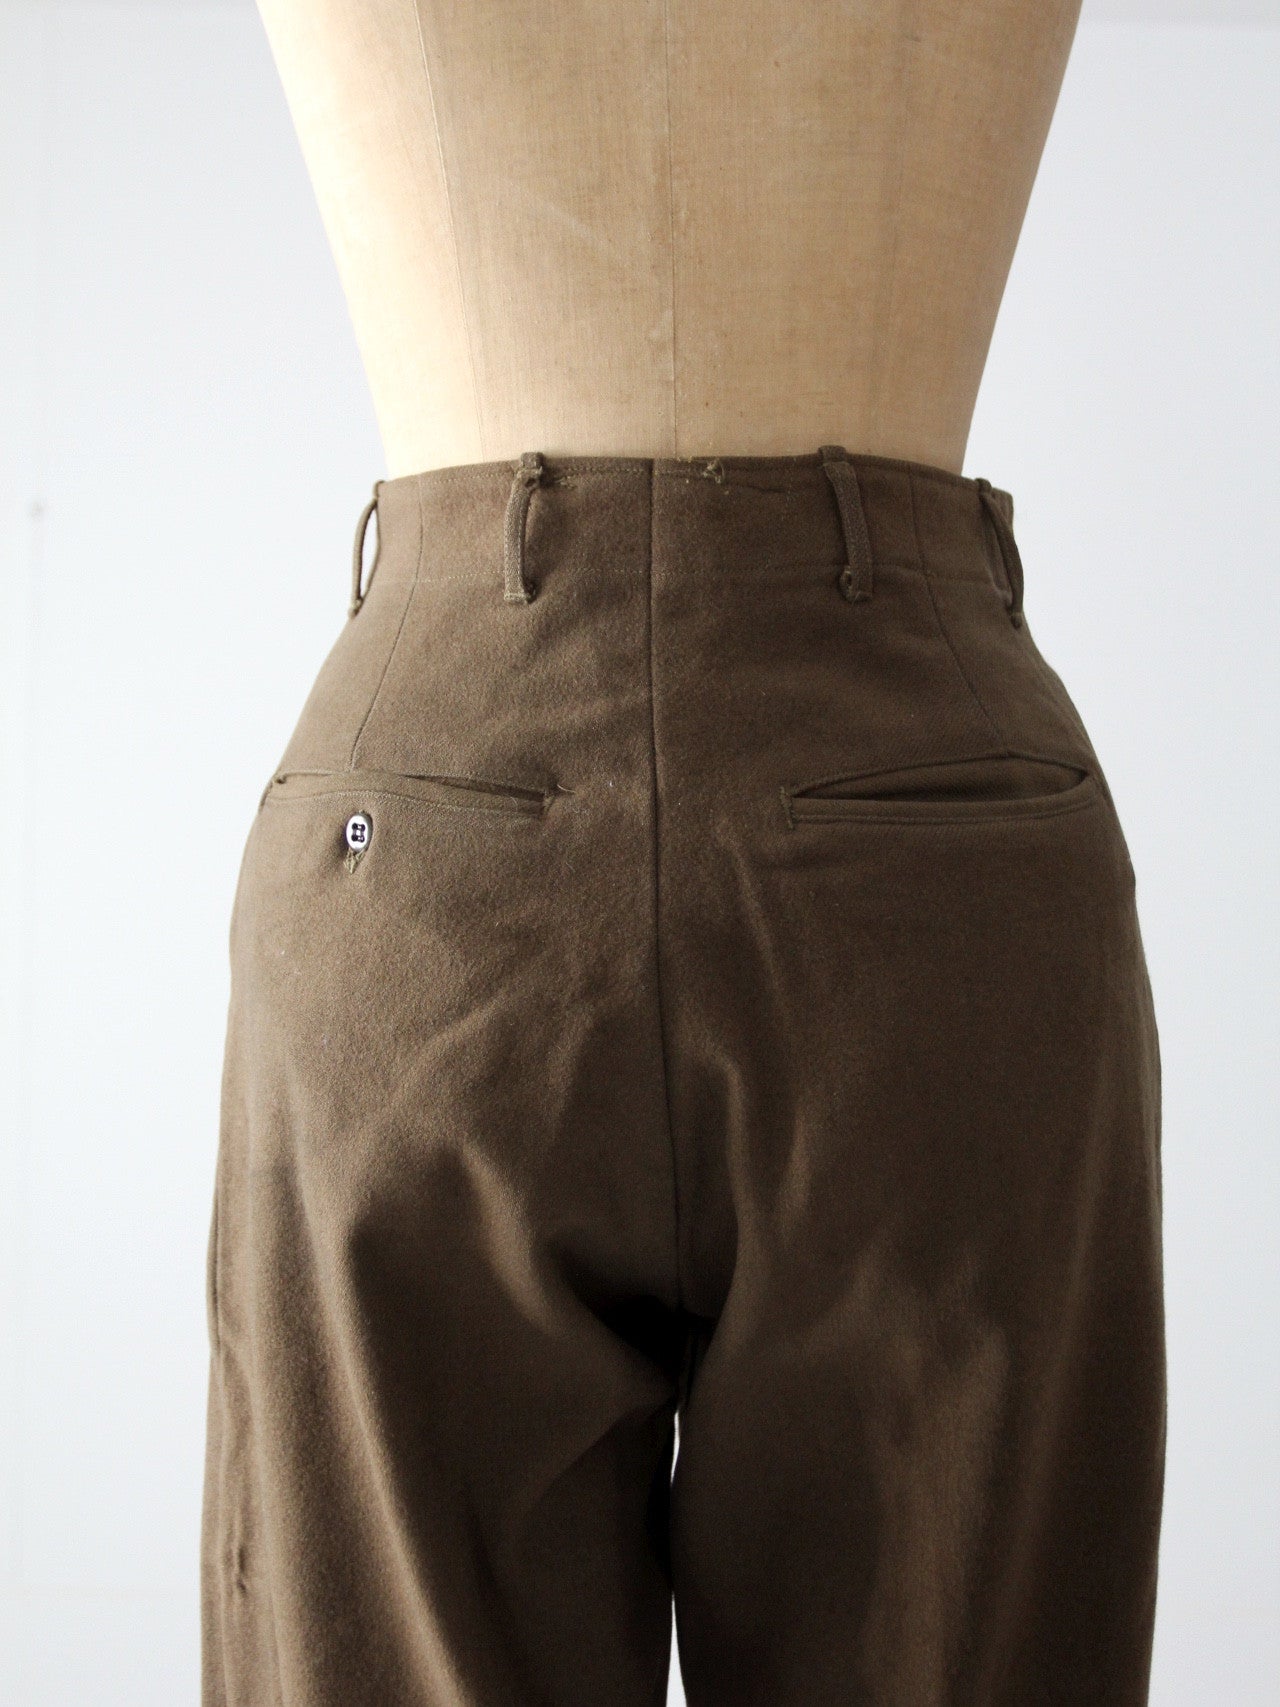 SOLD Archive Area WWII US Army M1944 Trousers Pants 34x31